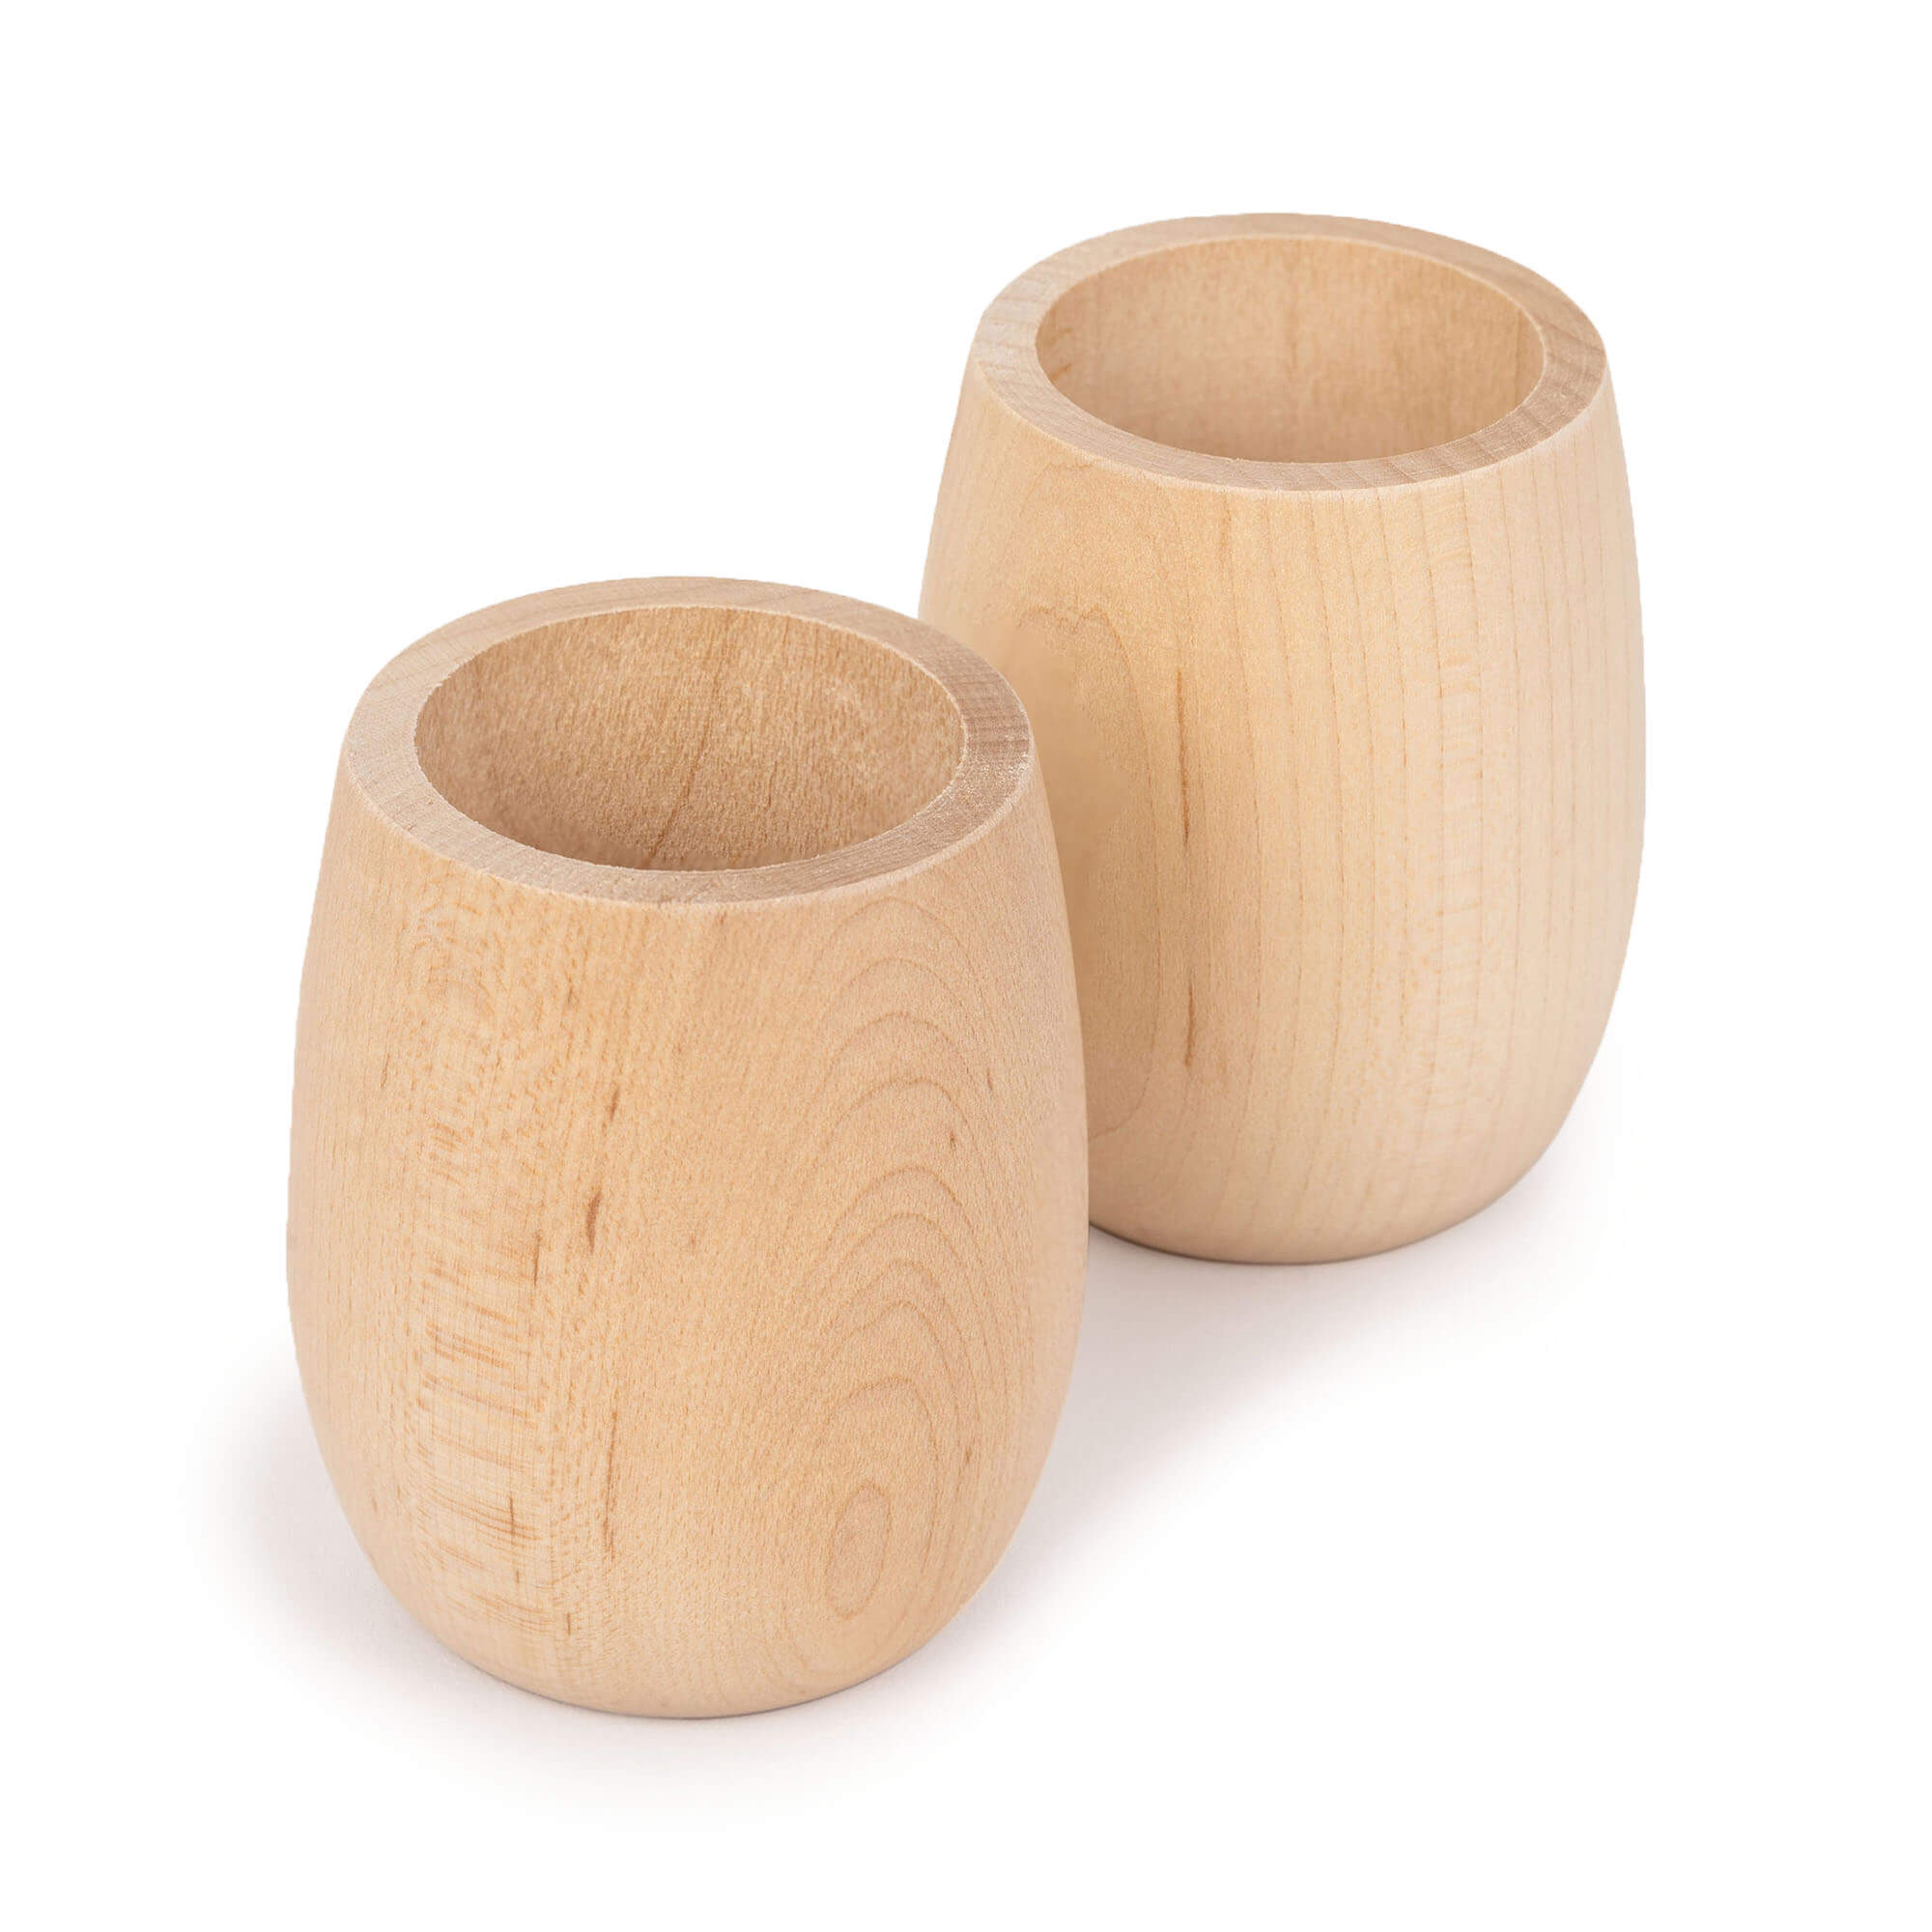 Wood Play Cups, Set of 2